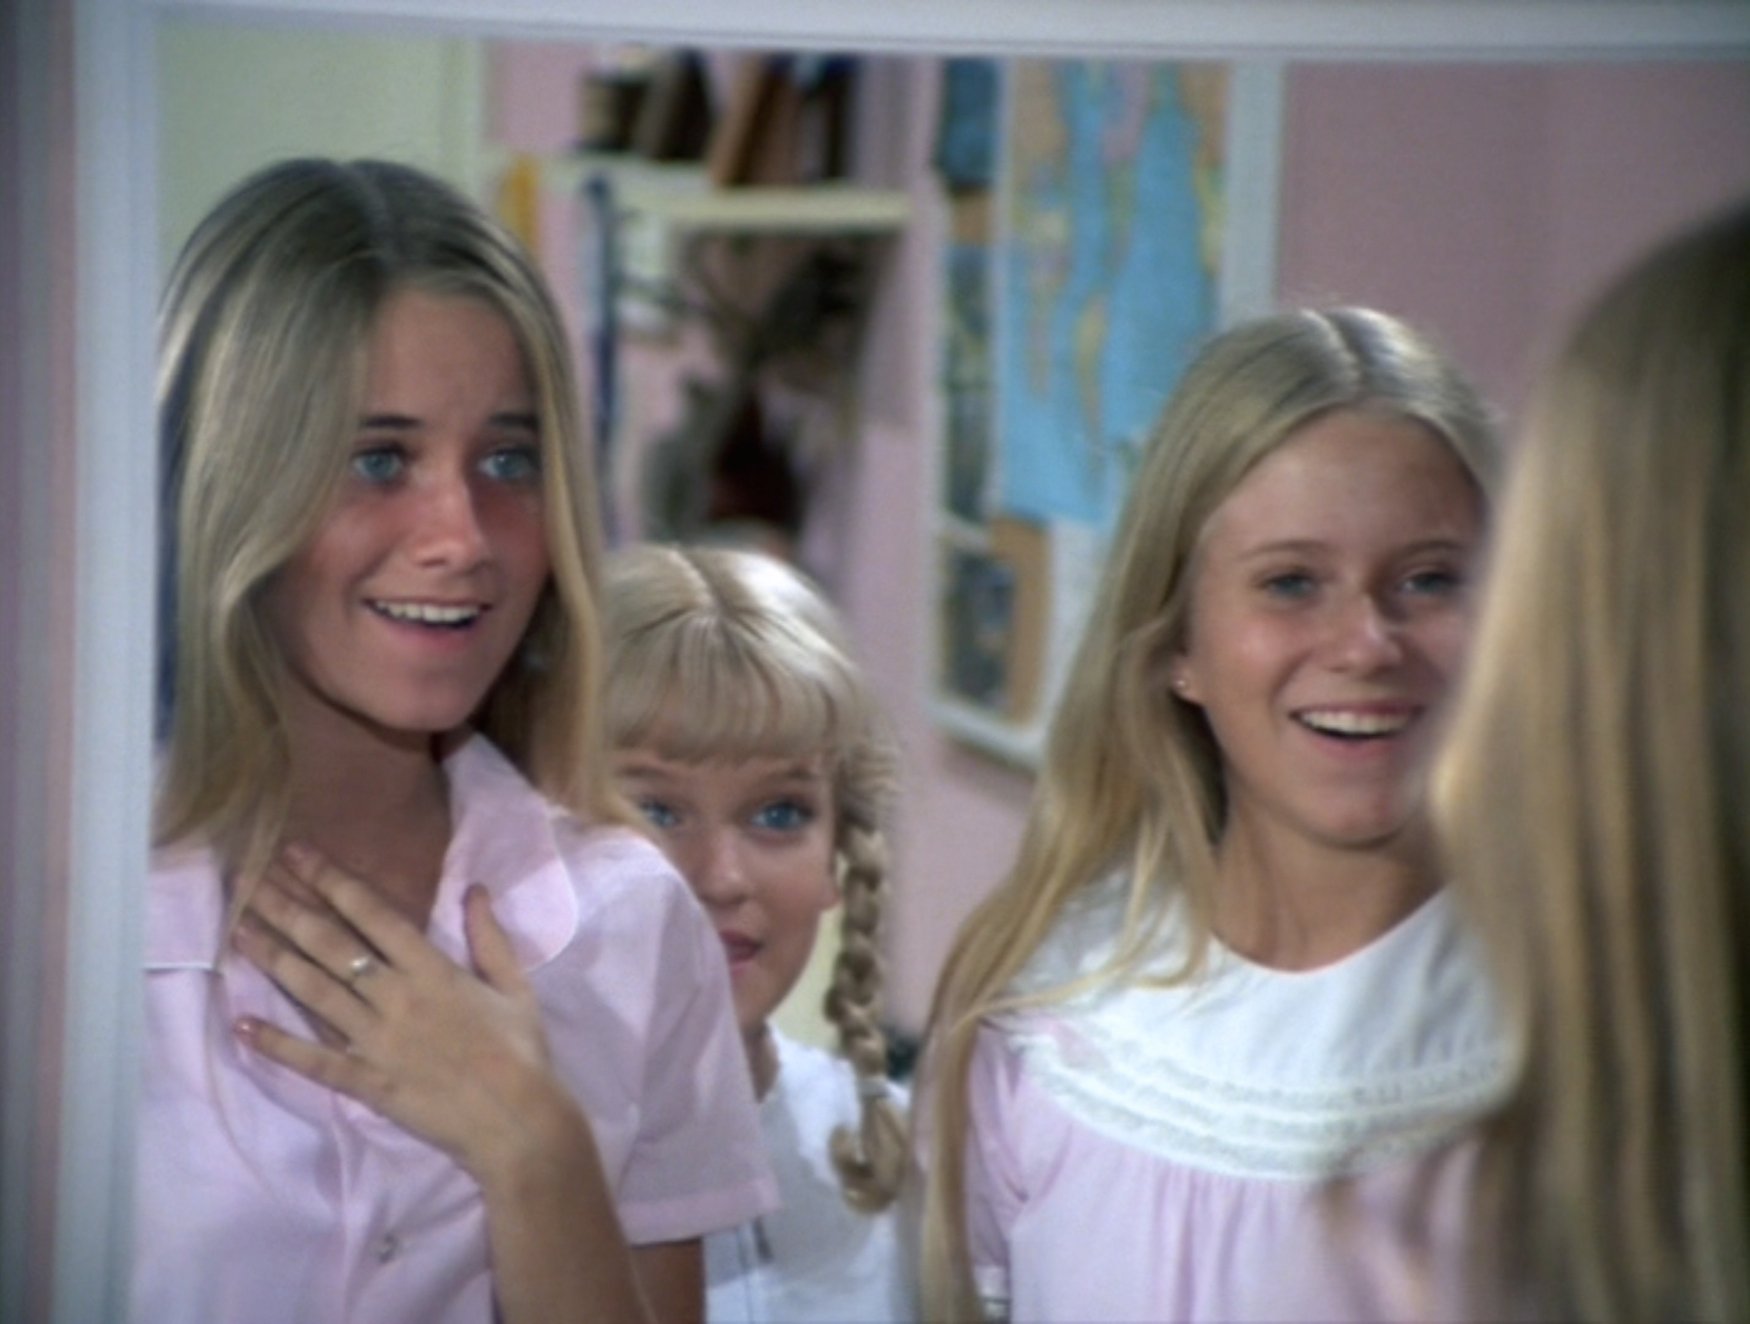 ‘The Brady Bunch’ Star Maureen McCormick Hated This Plot Point for Marcia Brady: ‘I Thought It Was Stupid’